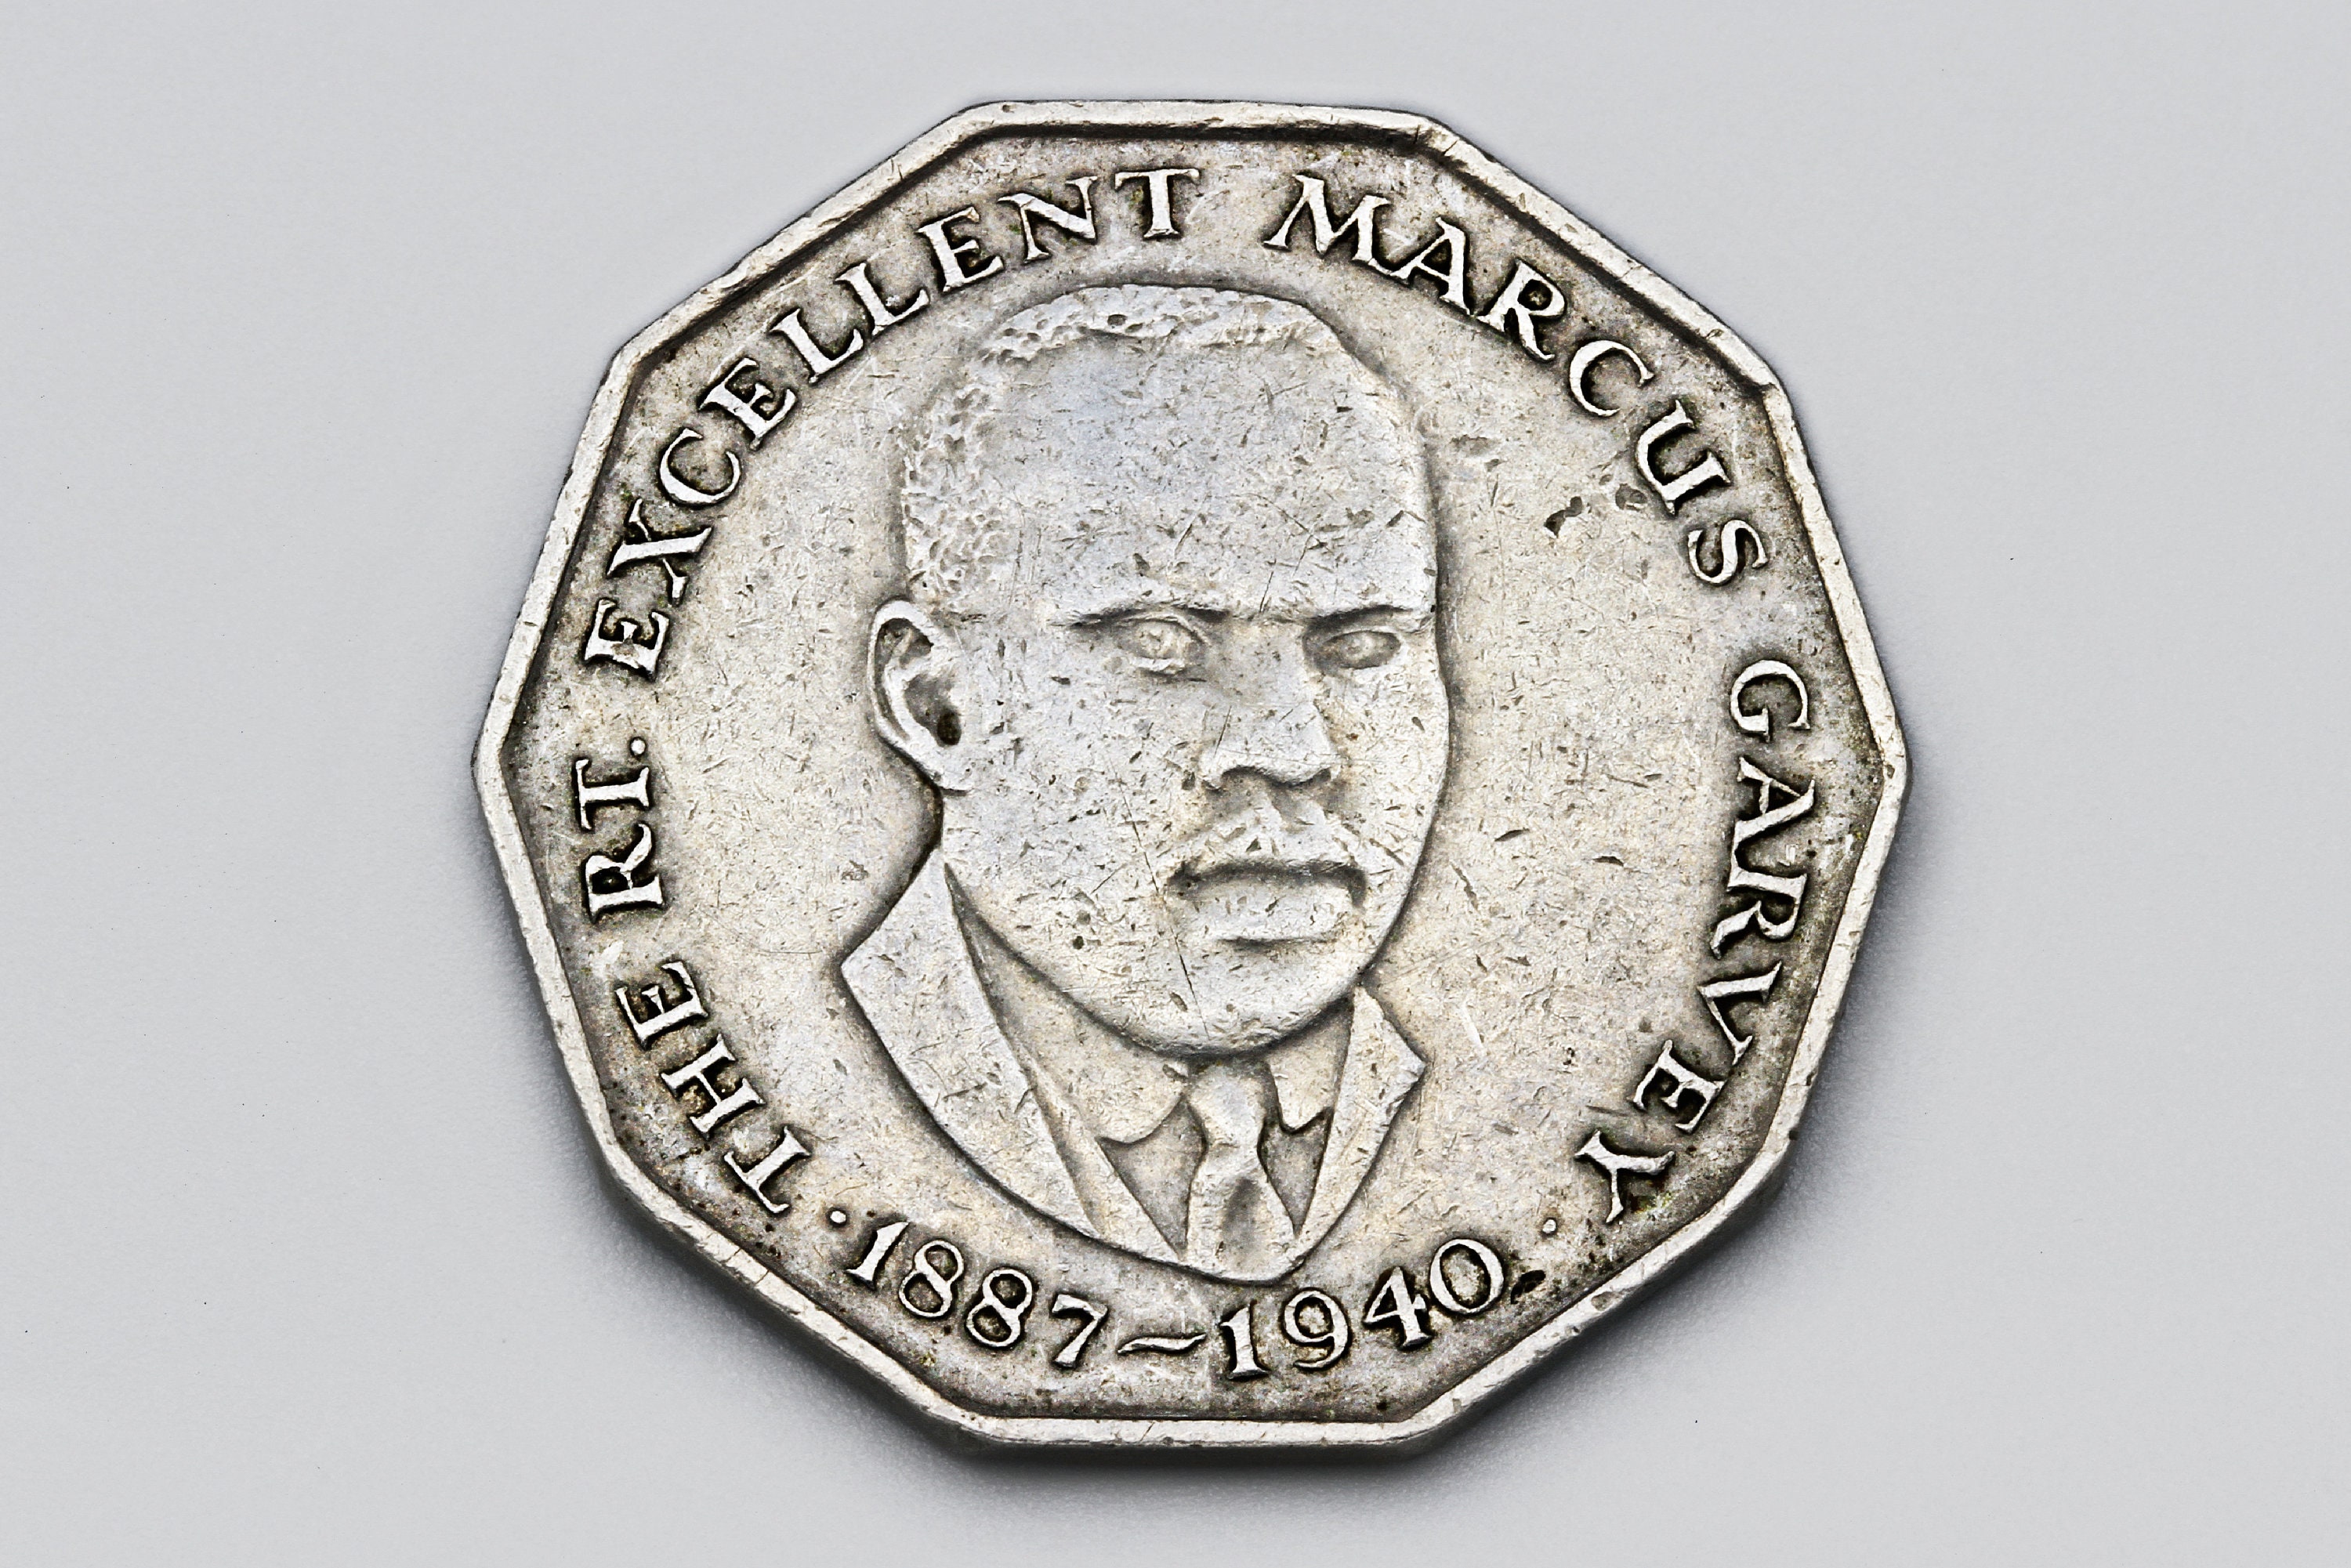 Jamaican Dollar (JMD) - Overview, History, Coins and Banknotes